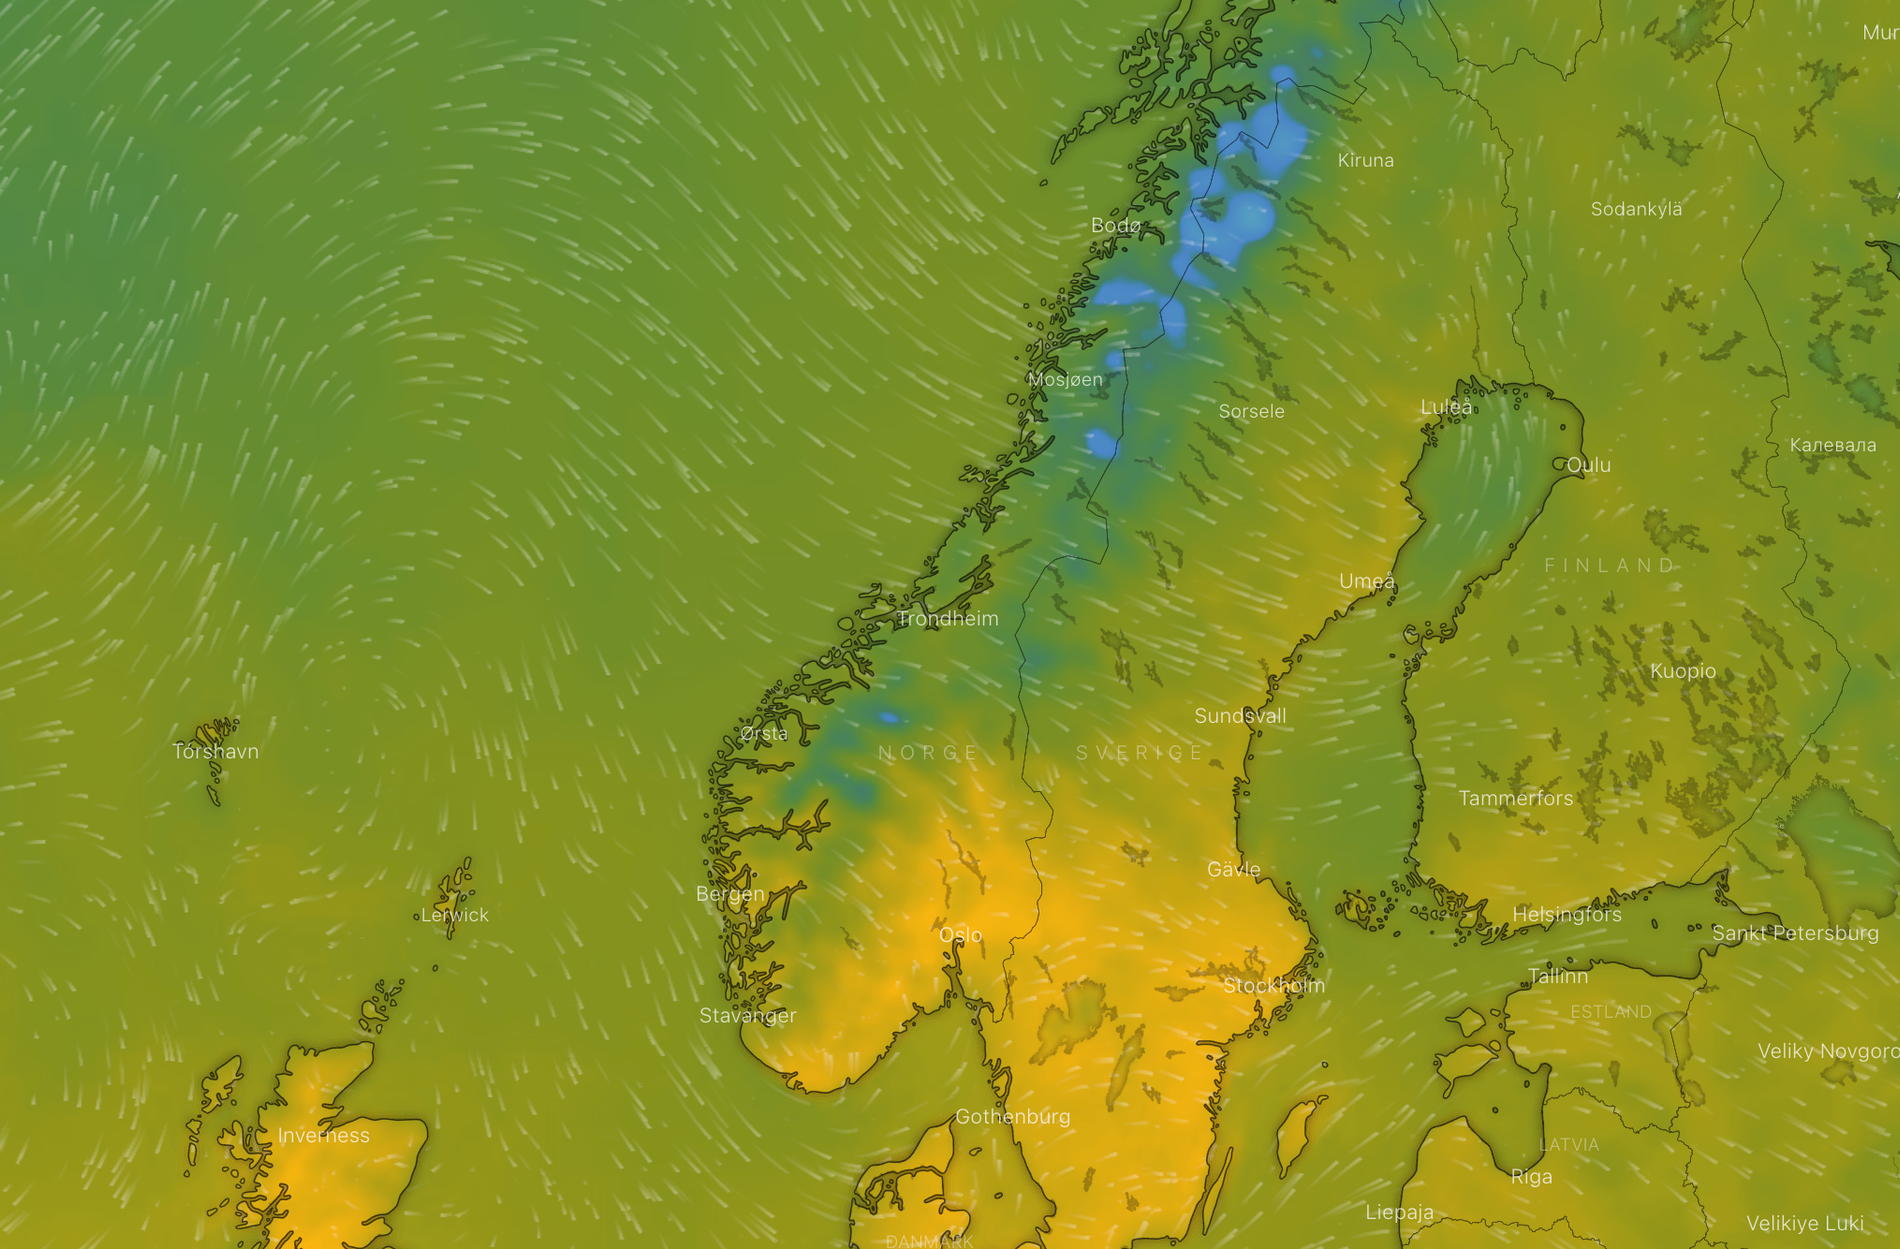 It is forecast to be sunny and warm in southern Norway for the foreseeable future.  But in northern Norway the weather turns gray and wet